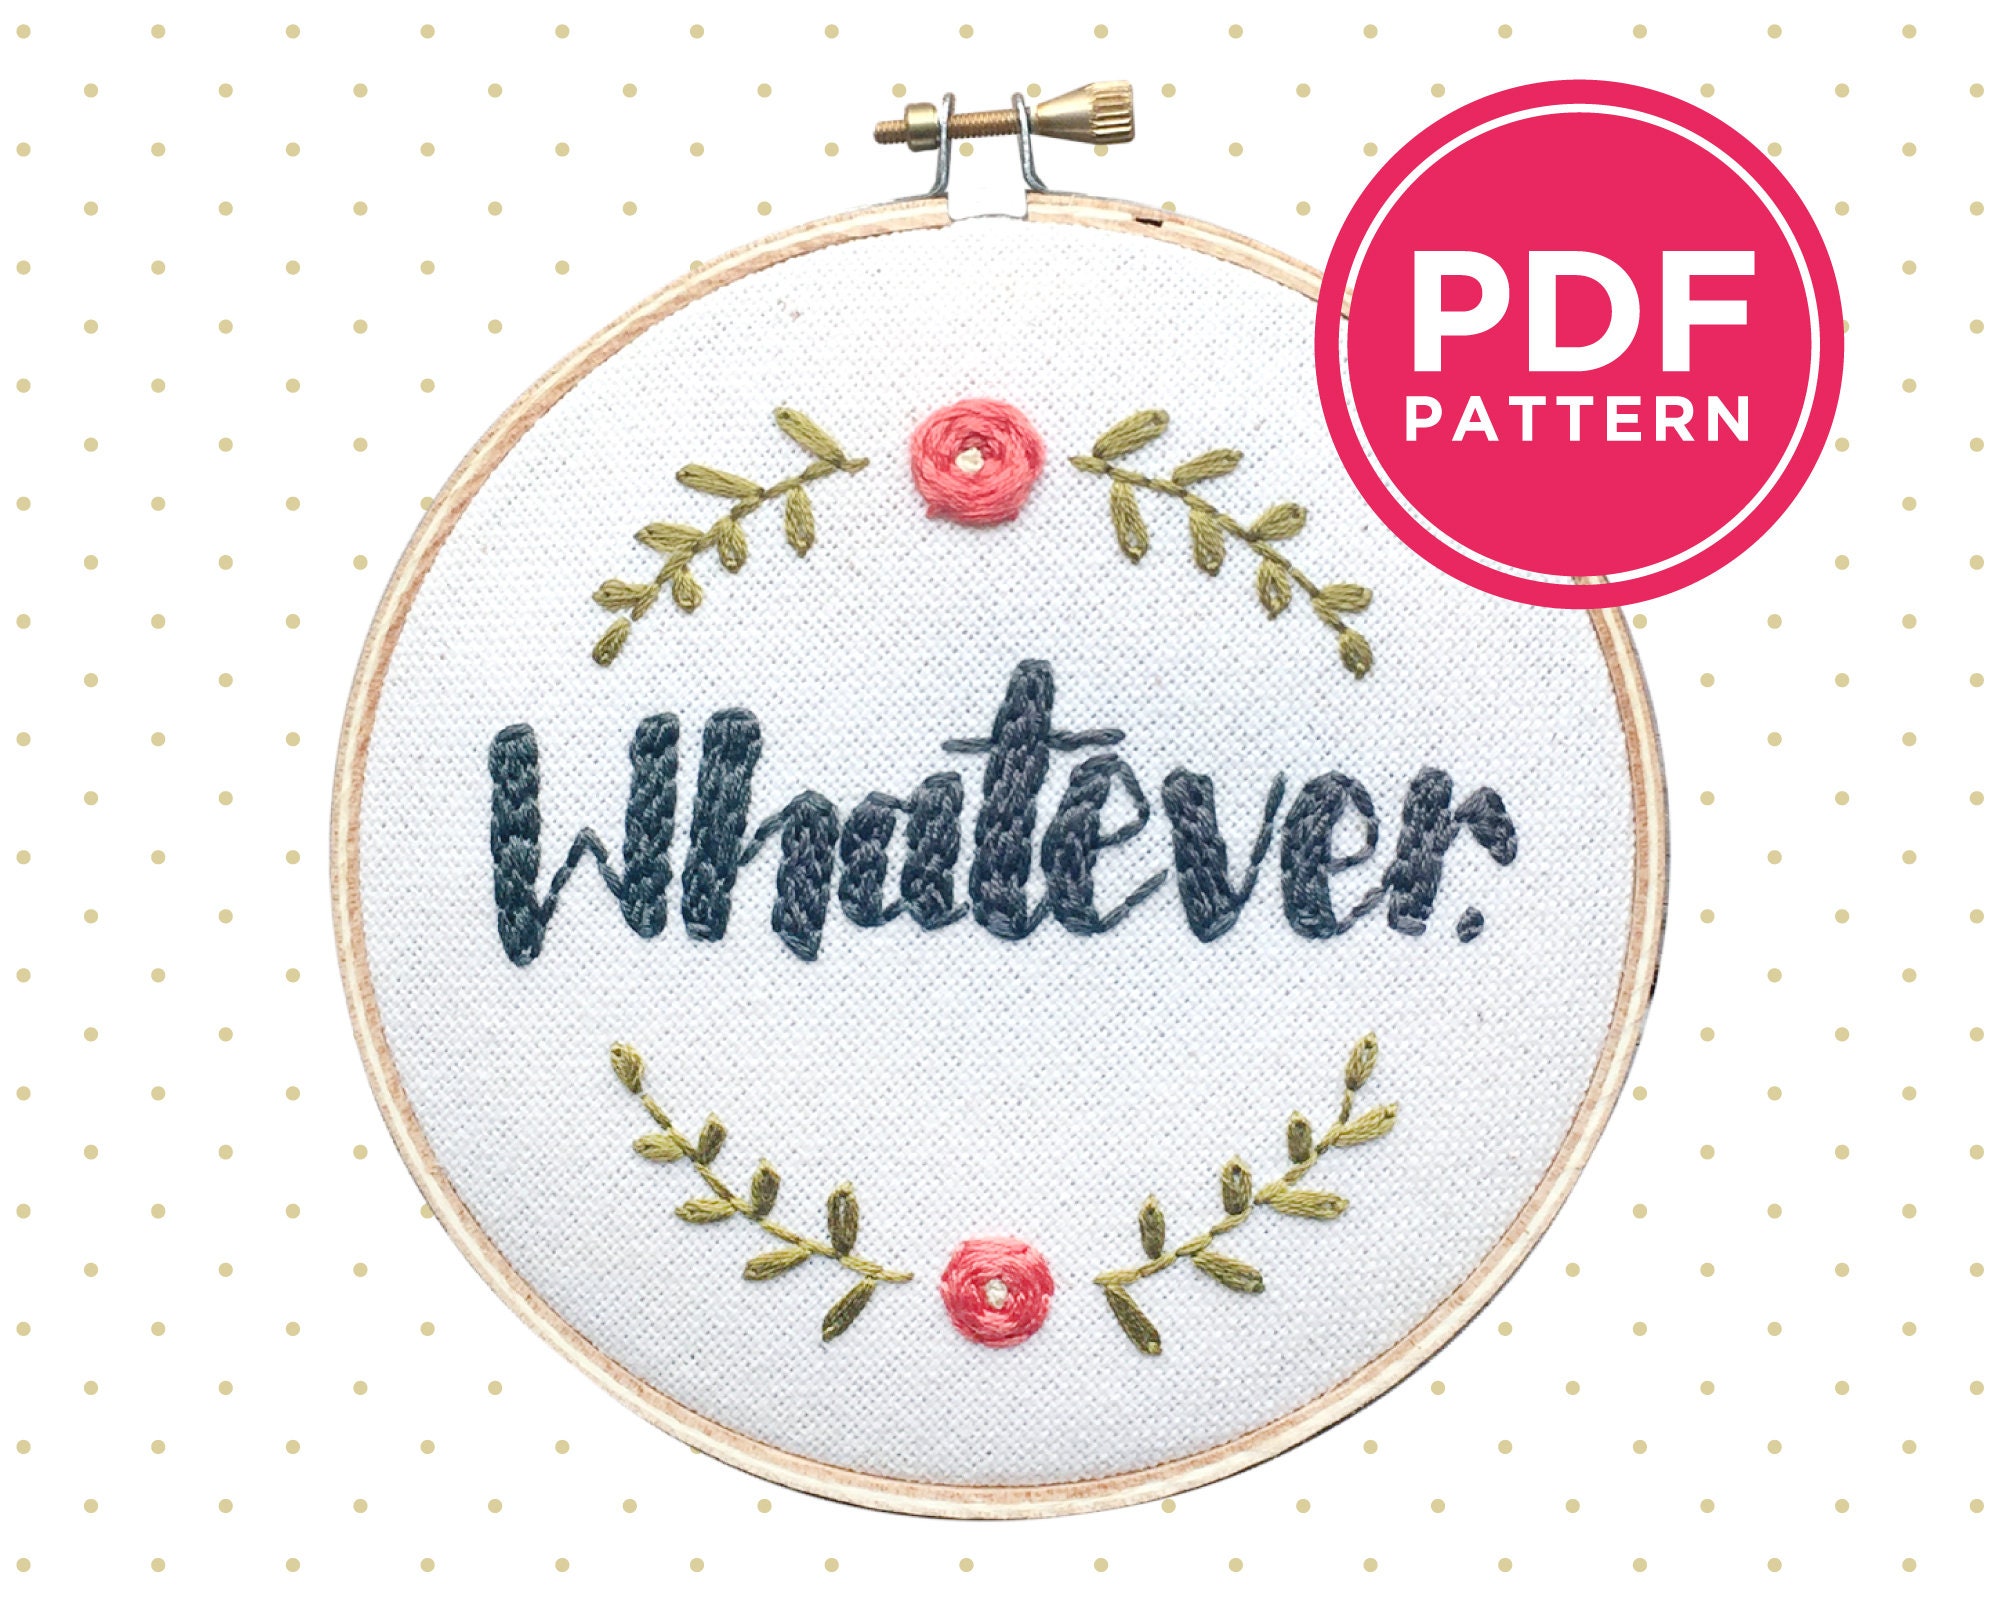 Hand Embroidered Patches embroidery pattern pdf instant download